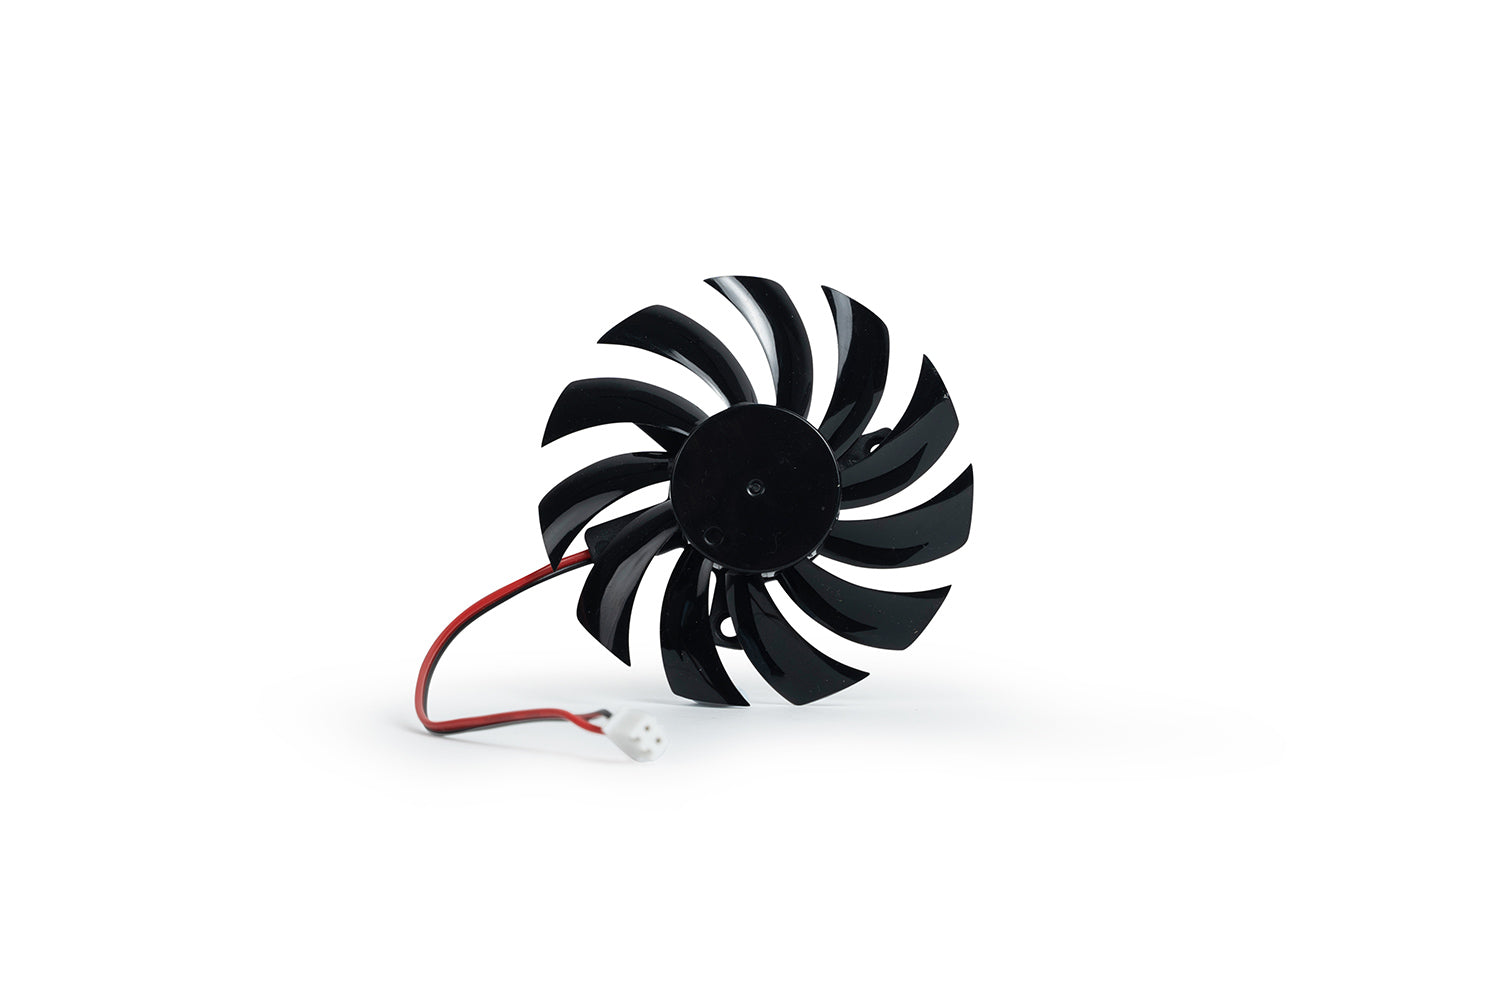 GT430 Graphic card fan - 2 Pins / 12V